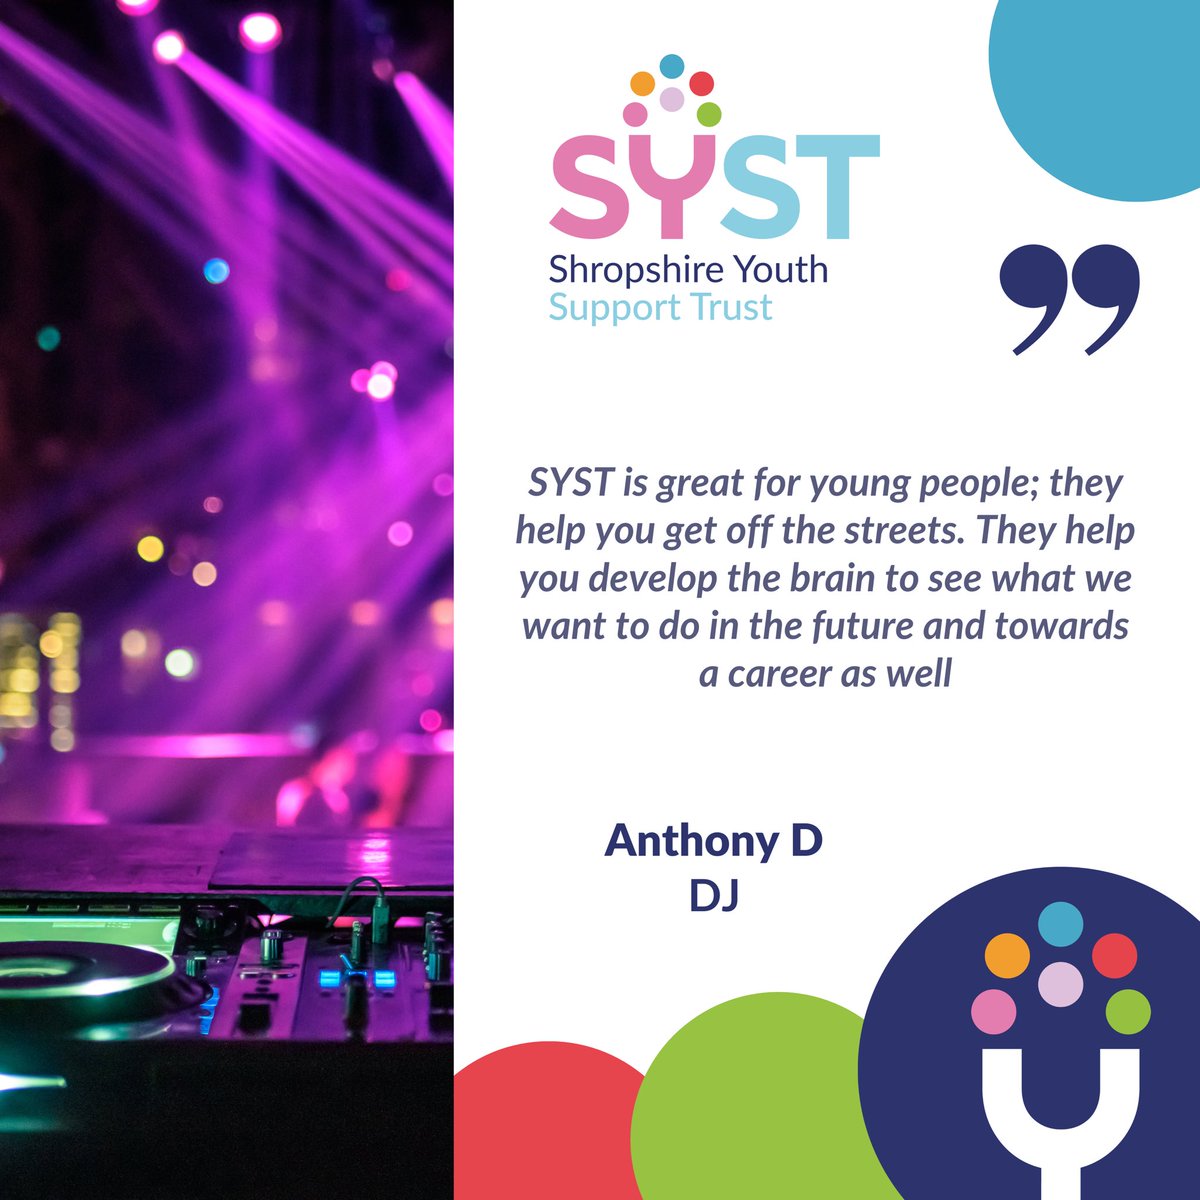 Our team at Shropshire Youth Support Trust (SYST) support young people in Shropshire 16-30 years of age who aren’t in employment, education or training.

hello@systbusiness.co.uk
01952 299214

#shropshire #telfordandwrekin #youthsupport #youthengagement